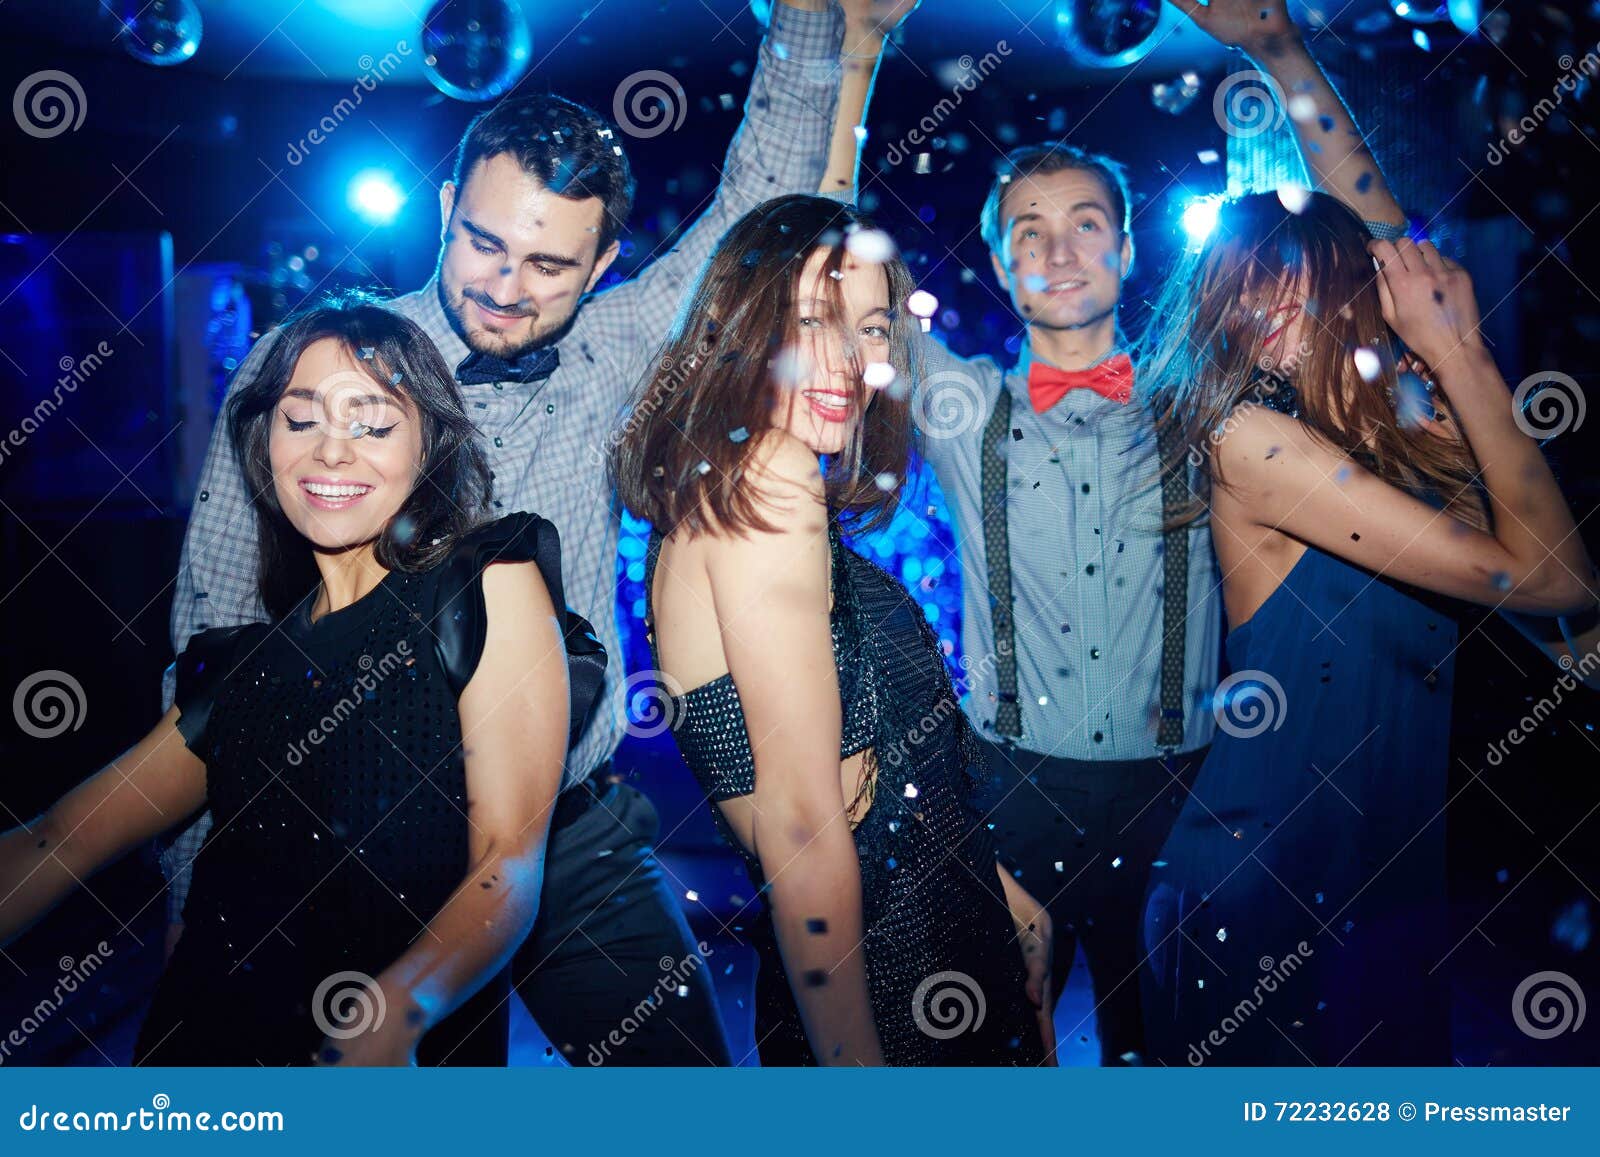 Charming dancers stock photo. Image of smiling, confetti - 72232628